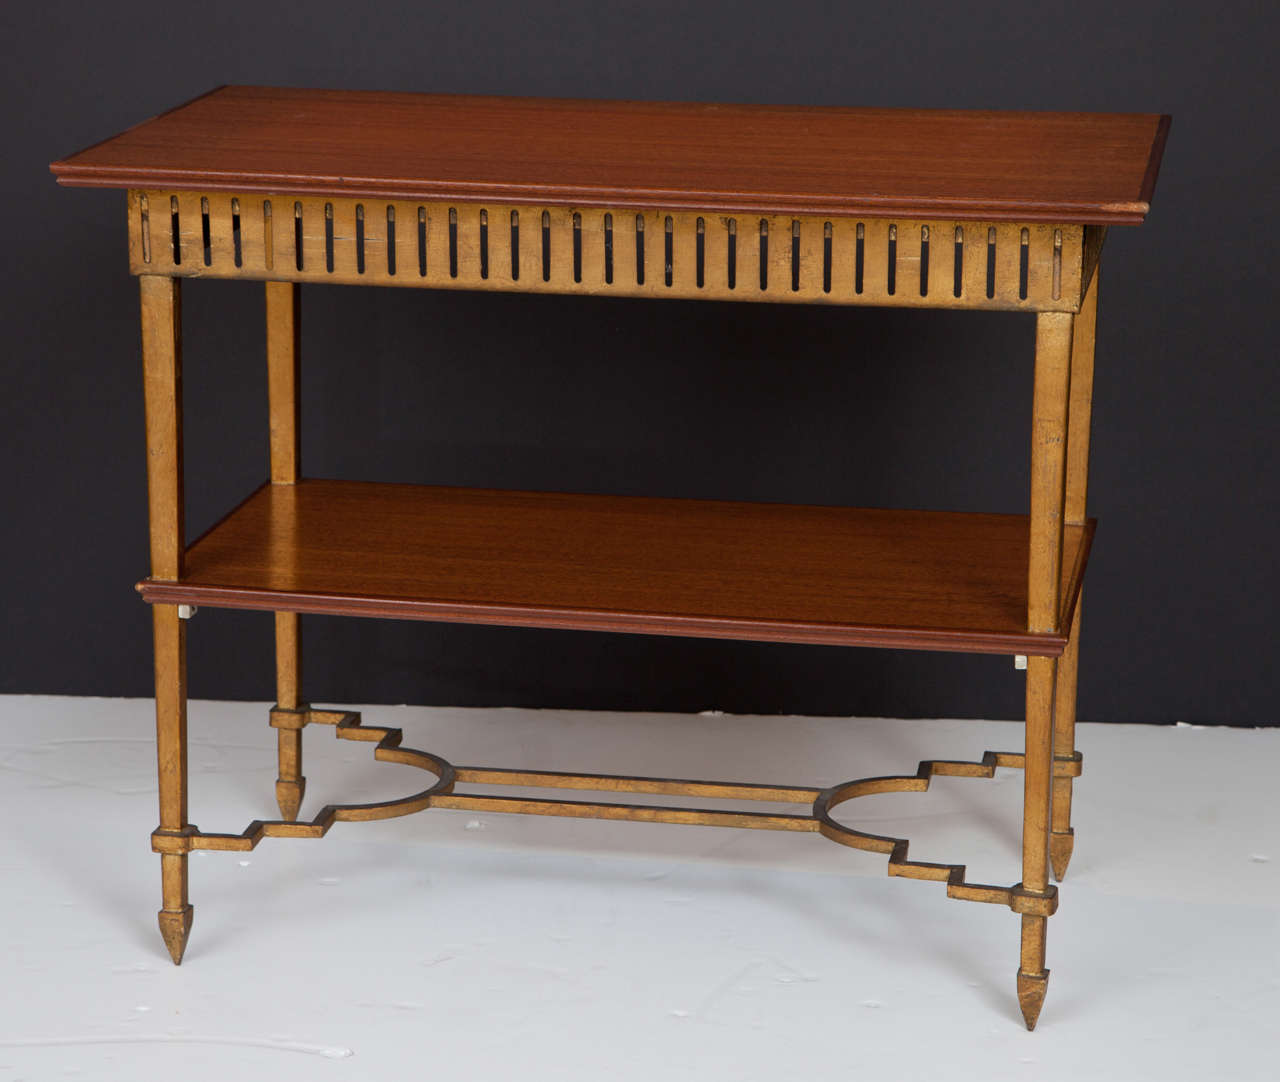 A unique and noteworthy table with a gilt iron frame with a mahogany top and lower shelf.  The pierced apron and stylized base make this table unique.  It can serve as a side table or can stand alone as a fabulous bar.